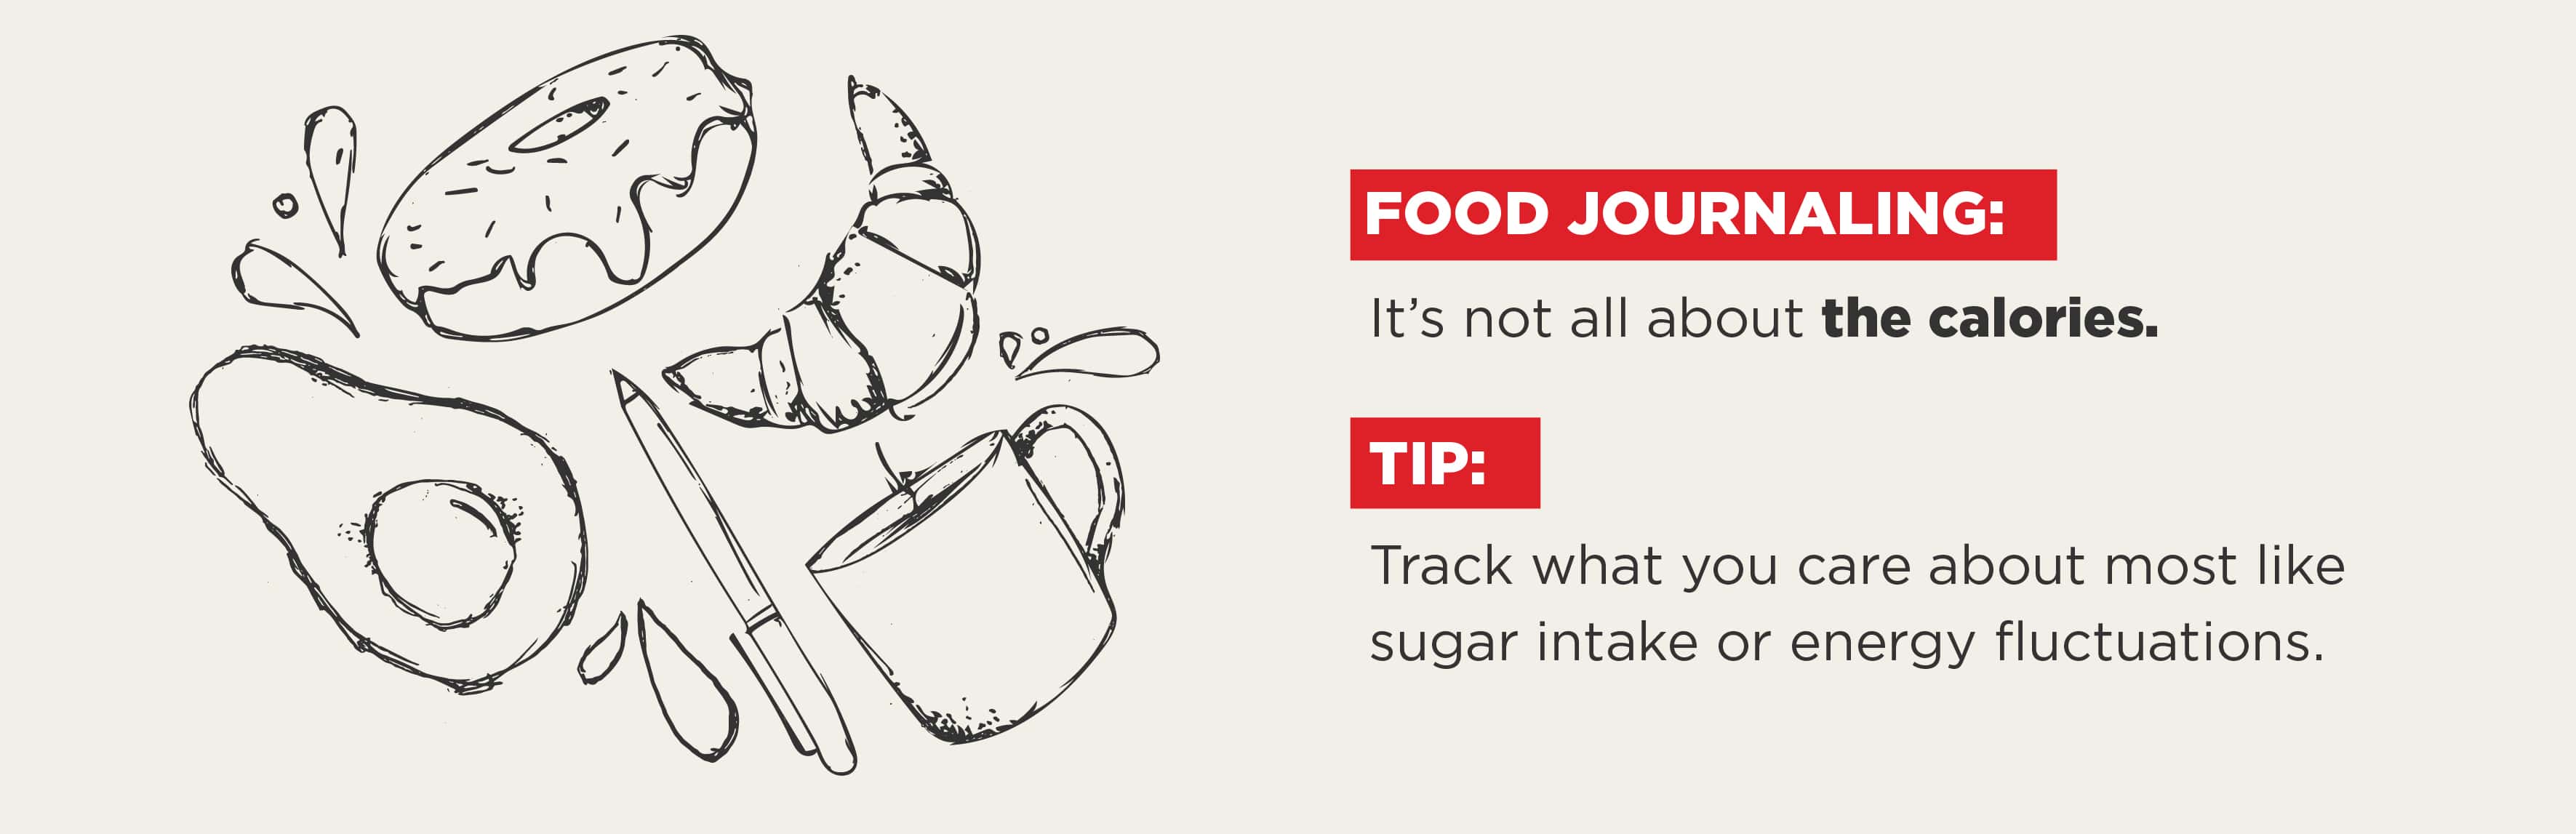 Tip: Track what you care about most, like sugar intake or energy fluctations.